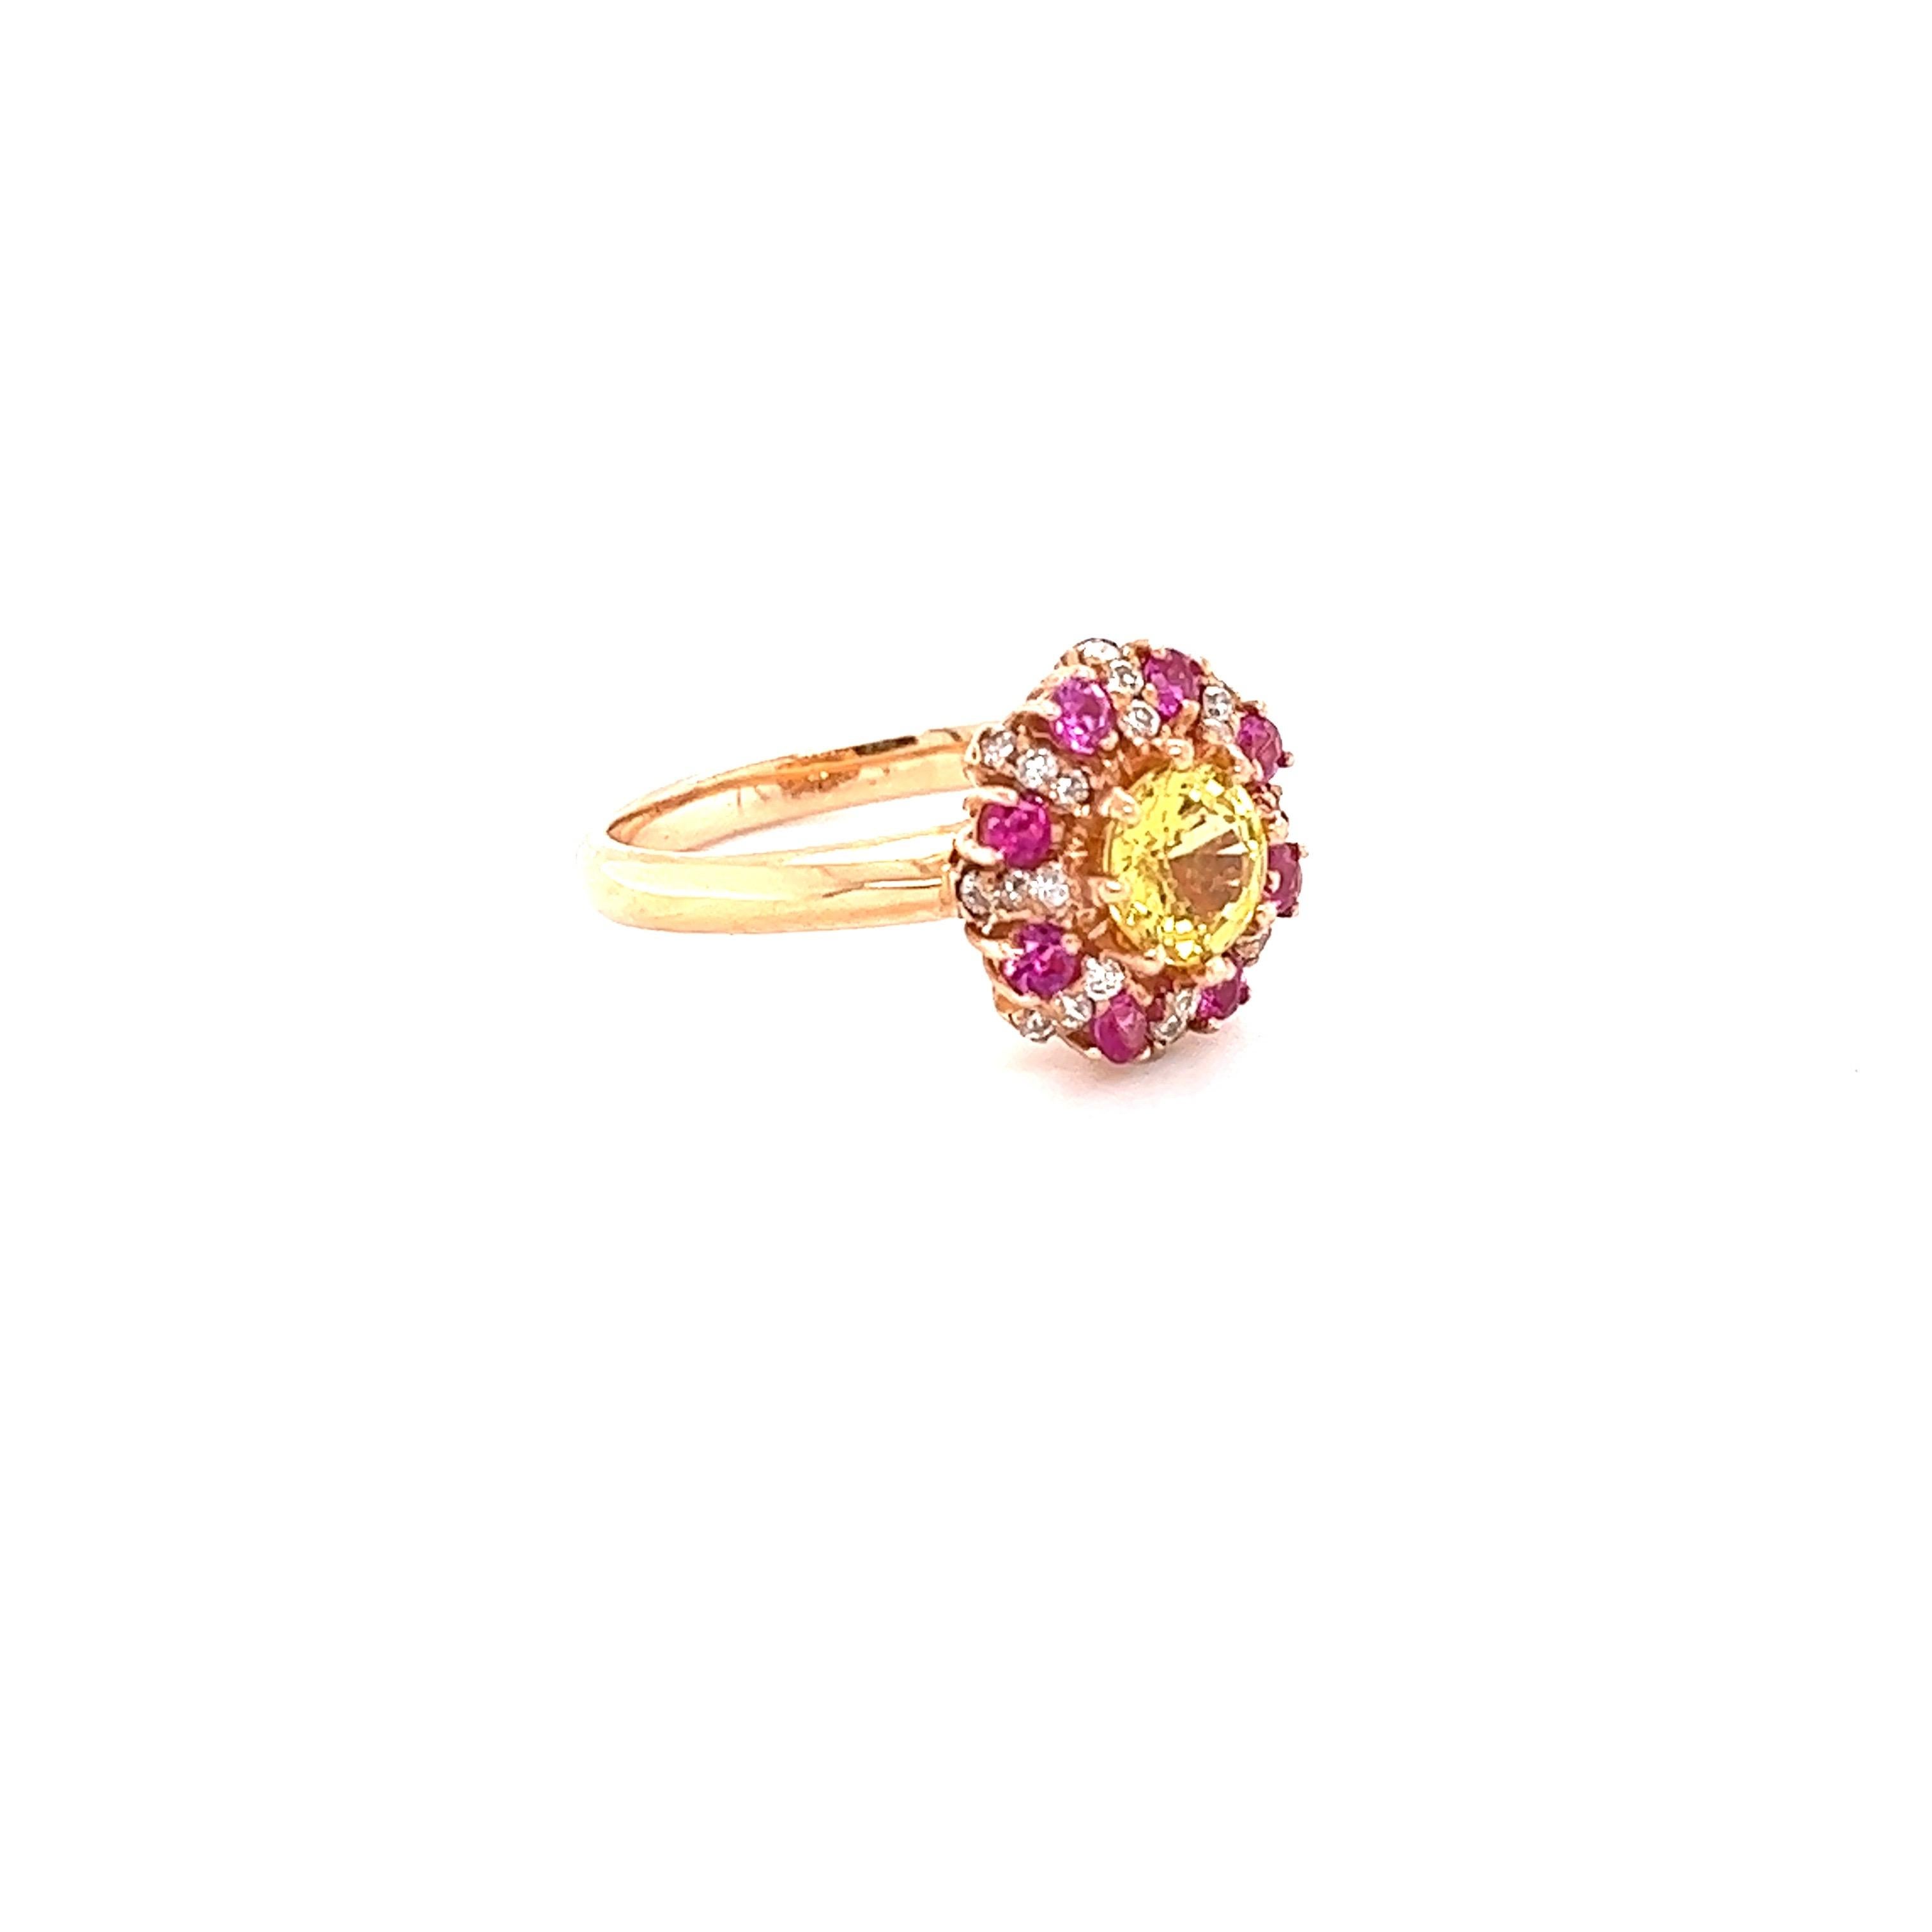 This beautiful ring has a Round Cut Yellow Sapphire that weighs 1.09 carats and measures at approximately 6 mm. The Yellow Sapphire is heated as per industry standards.

It is surrounded by 8 Pink Sapphires that weigh 0.40 Carats and also has 24